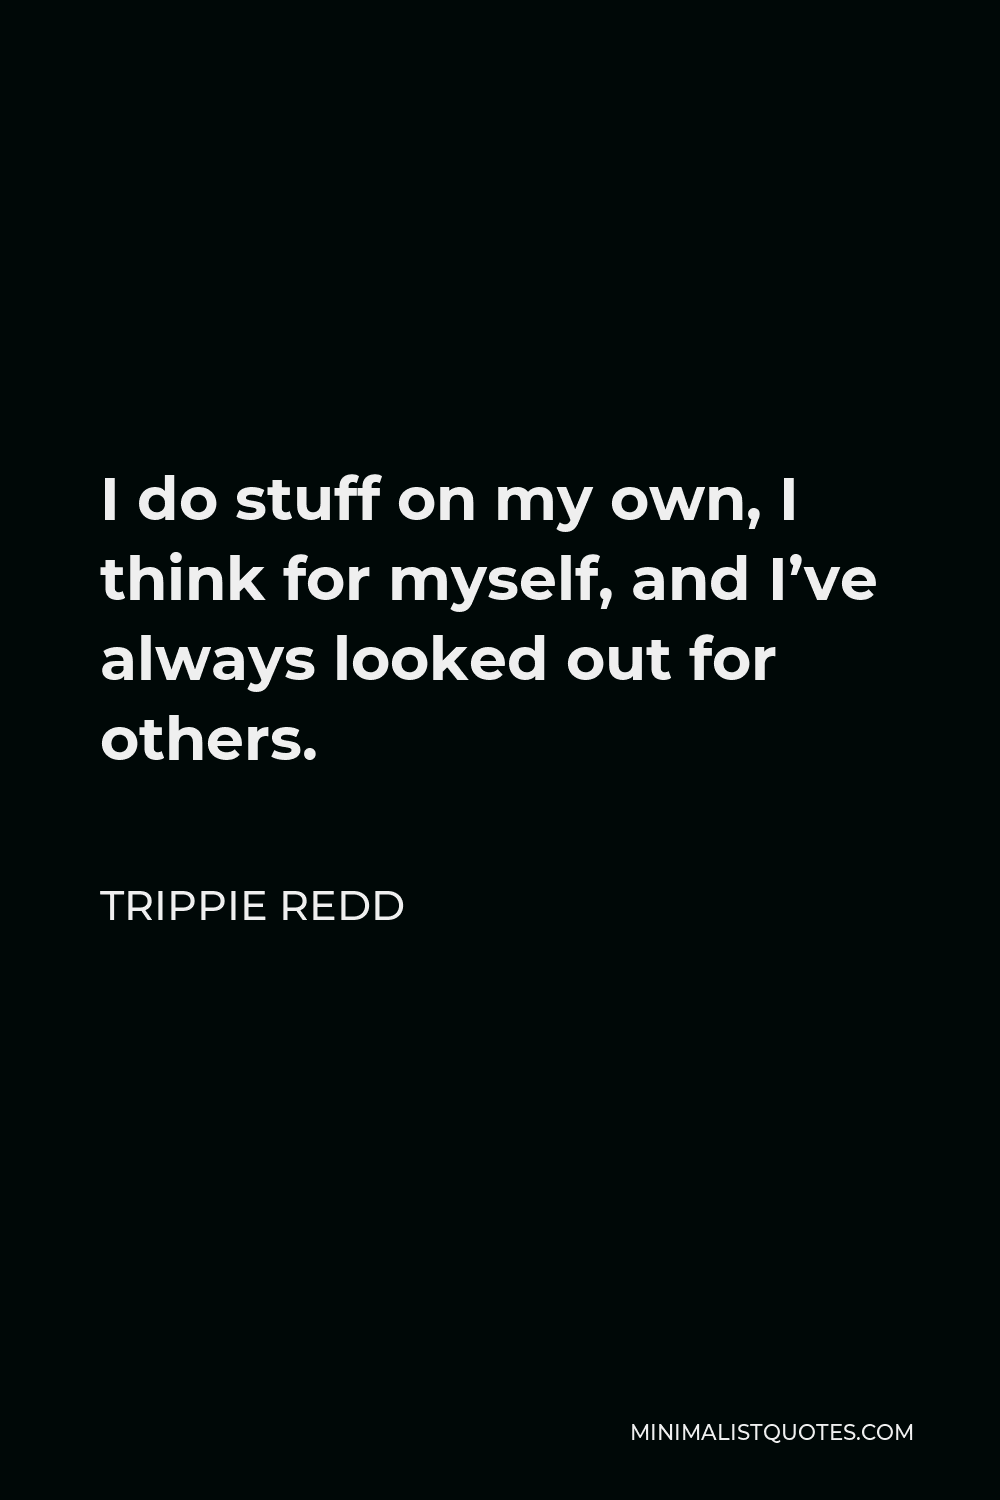 Trippie Redd Quote - I do stuff on my own, I think for myself, and I’ve always looked out for others.